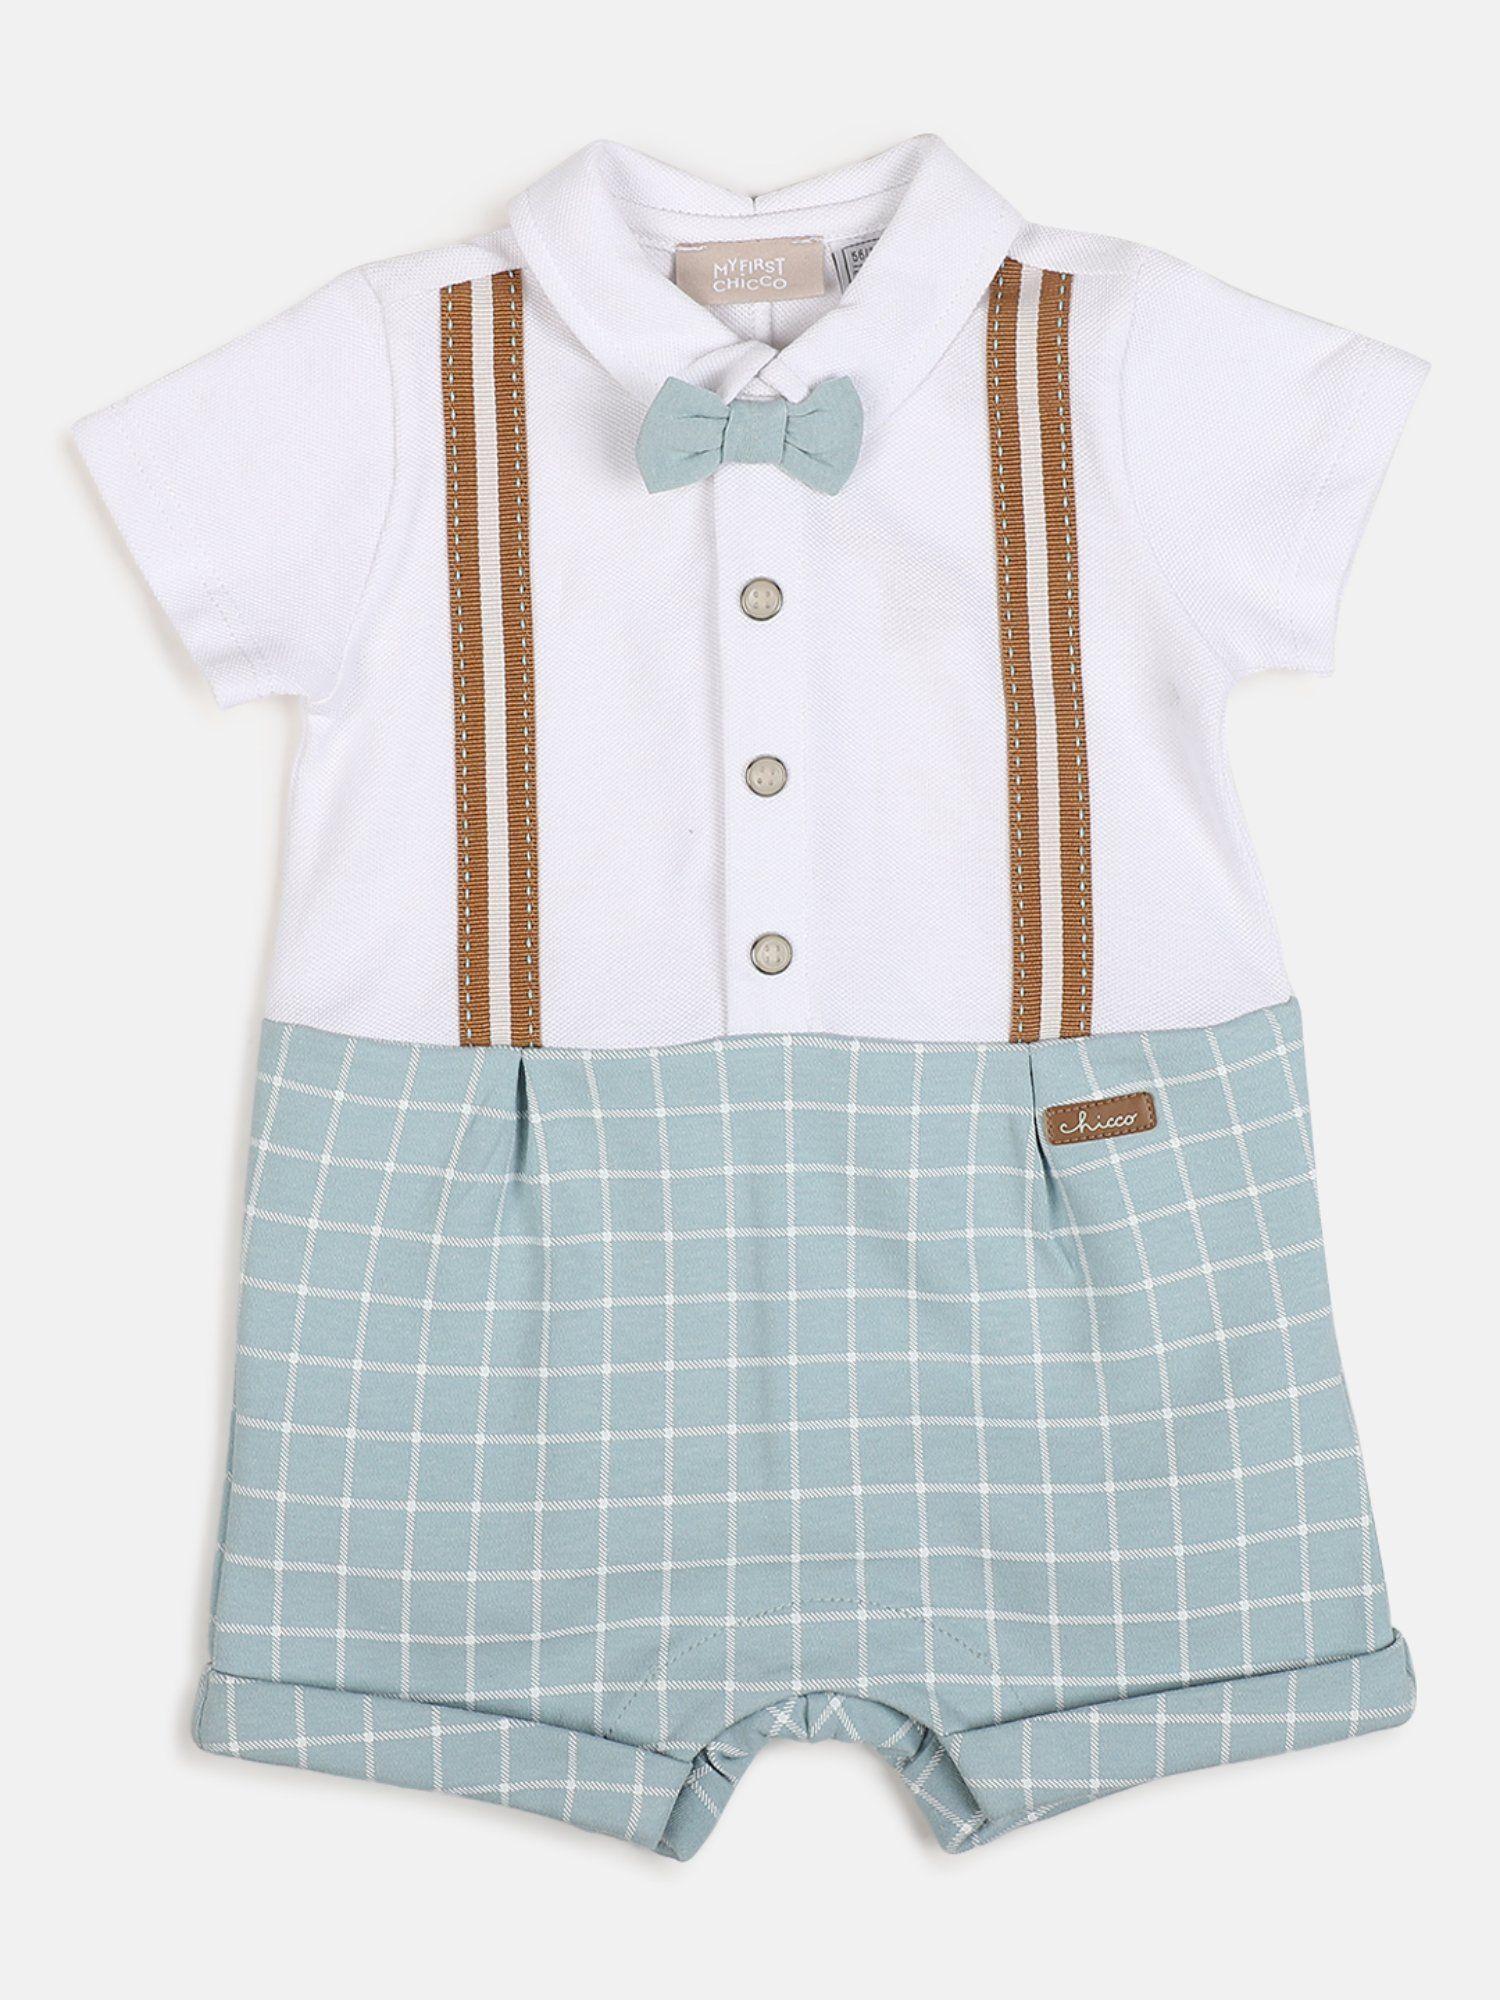 boys multi-color checkered short sleeve bodysuit with bow tie (set of 2)